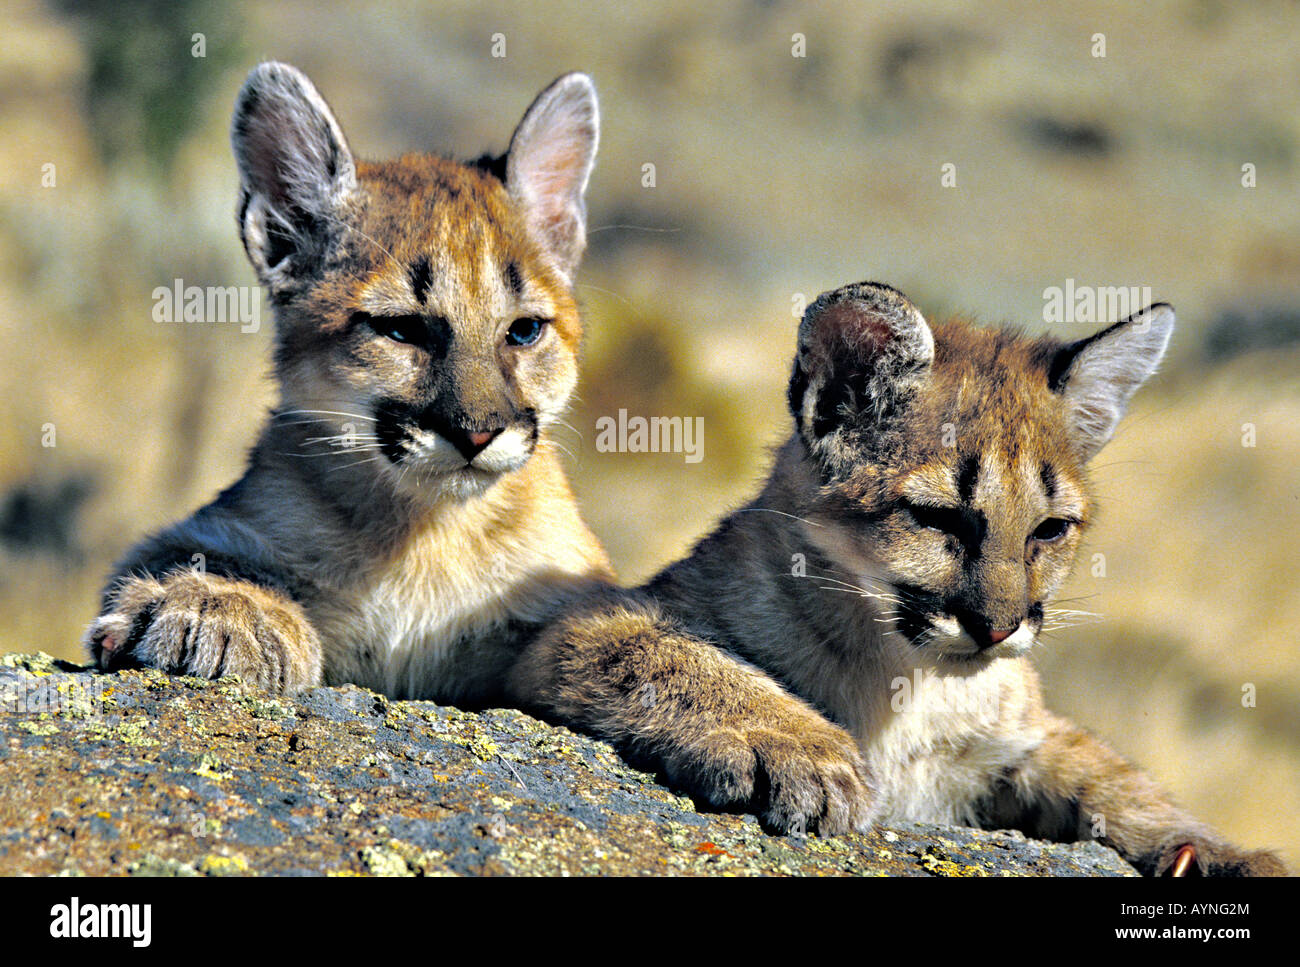 Young cougars Puma concolor western Montana model Stock Photo - Alamy